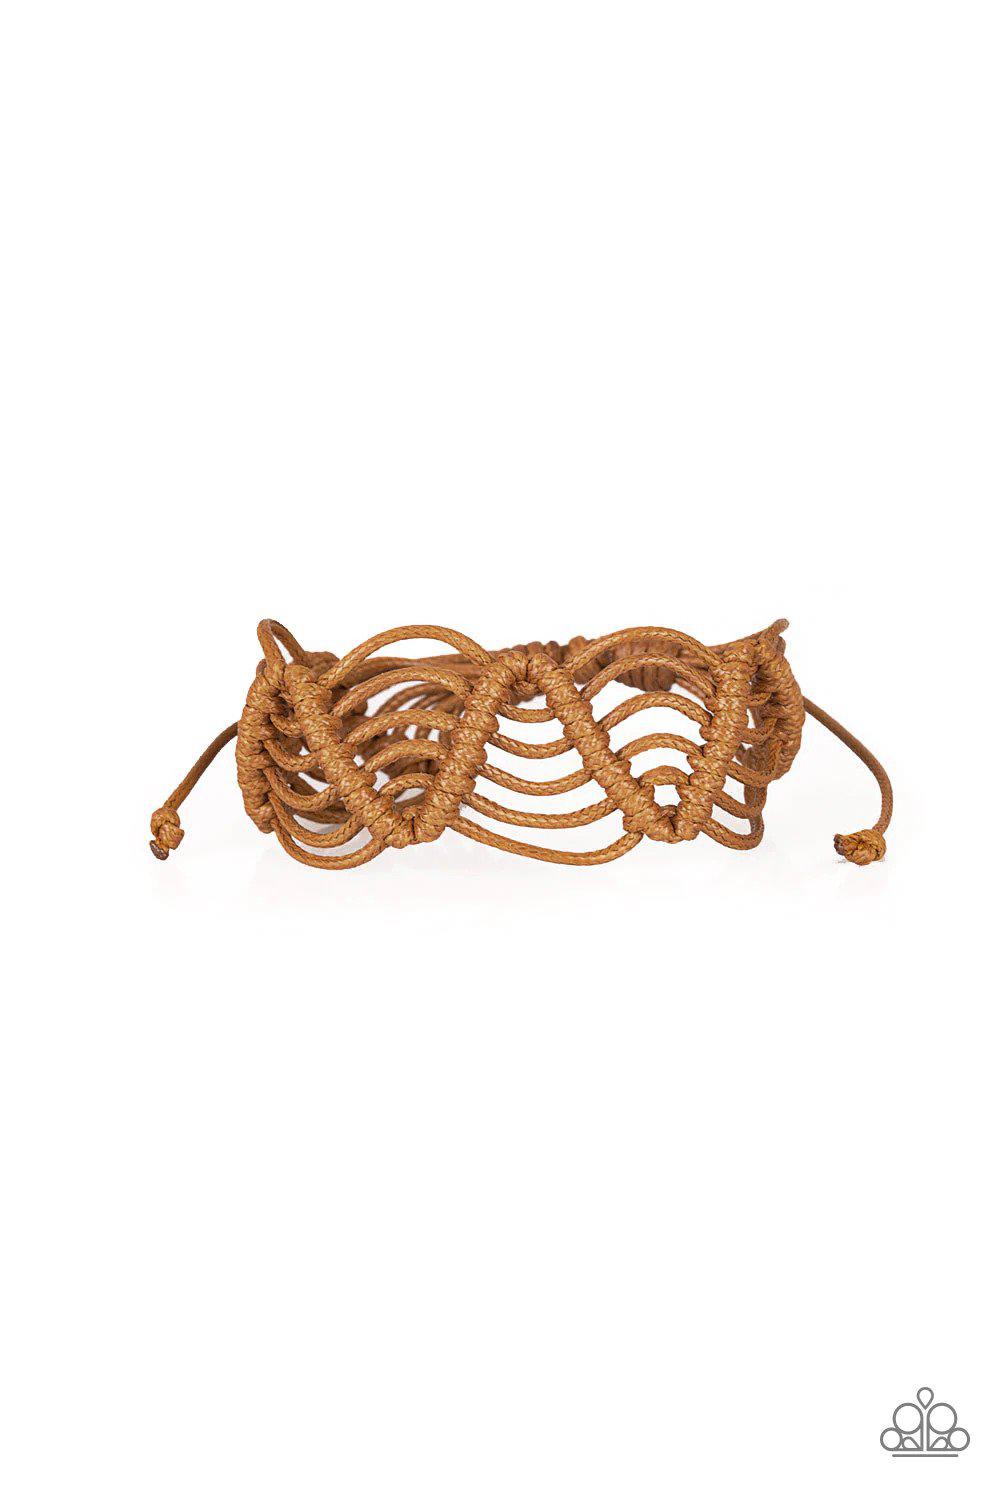 Rise To The Bait Brown Urban Bracelet - Paparazzi Accessories- lightbox - CarasShop.com - $5 Jewelry by Cara Jewels